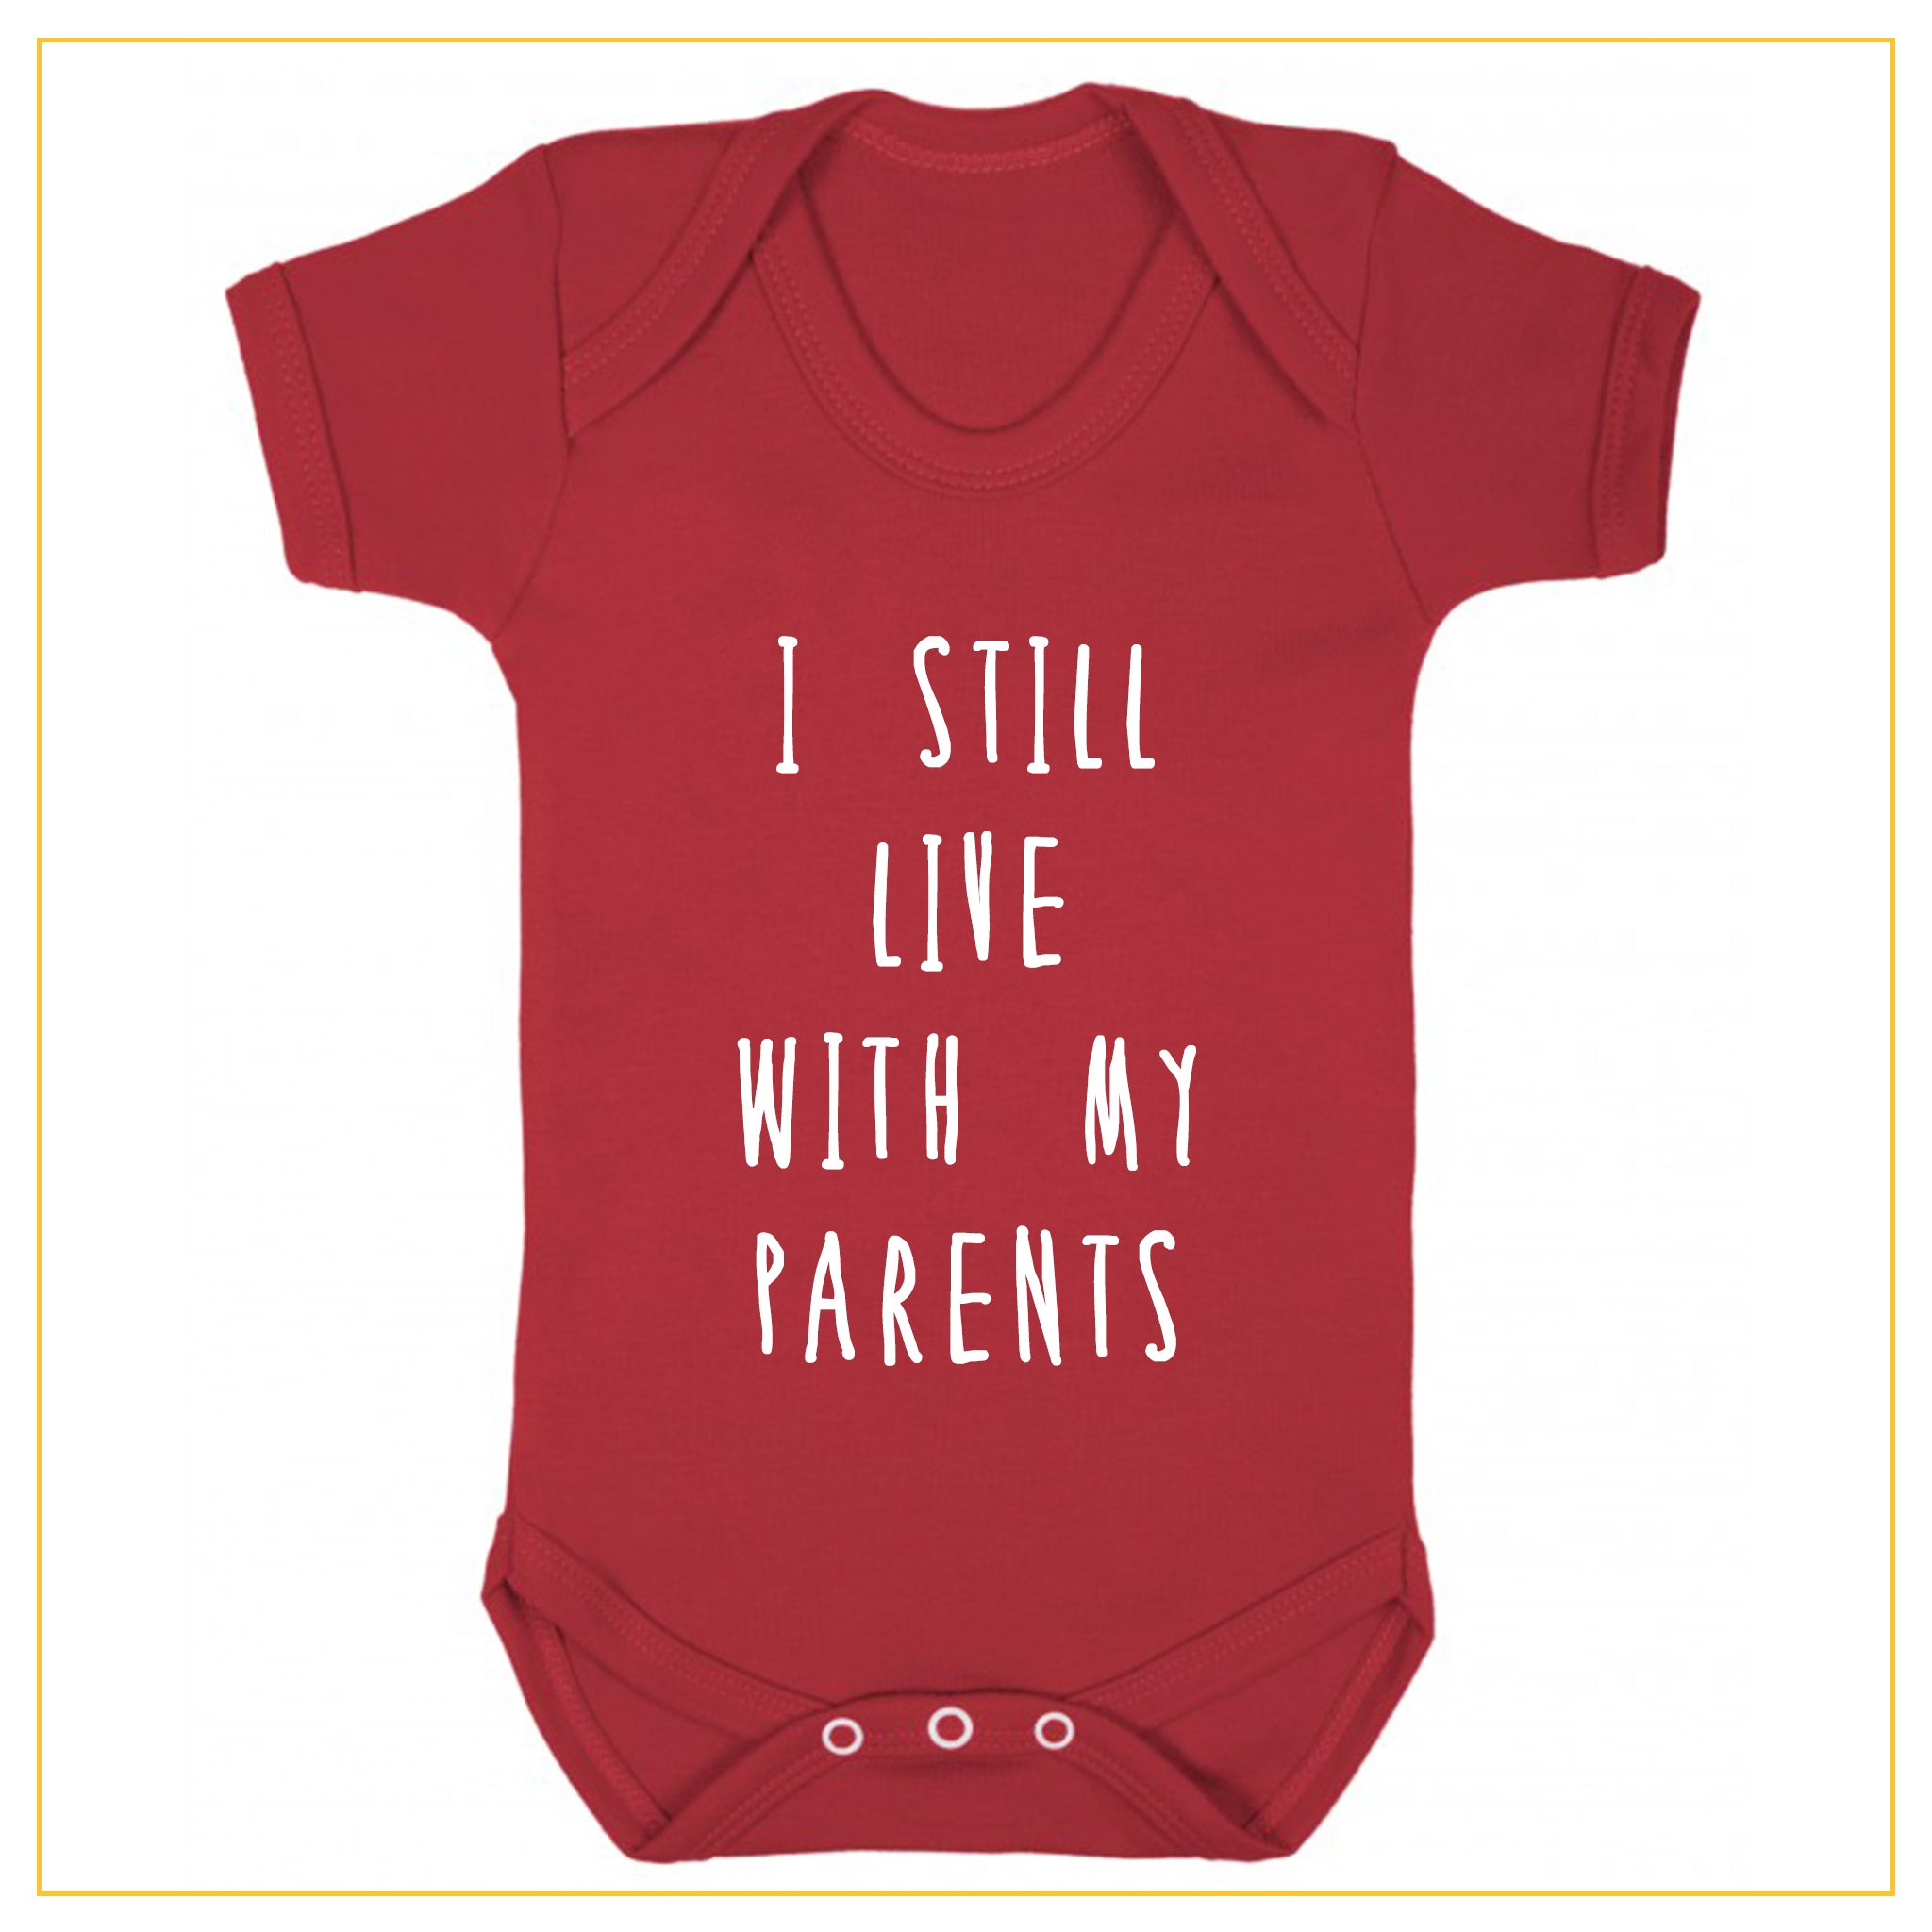 I still live with my parents baby onesie in red